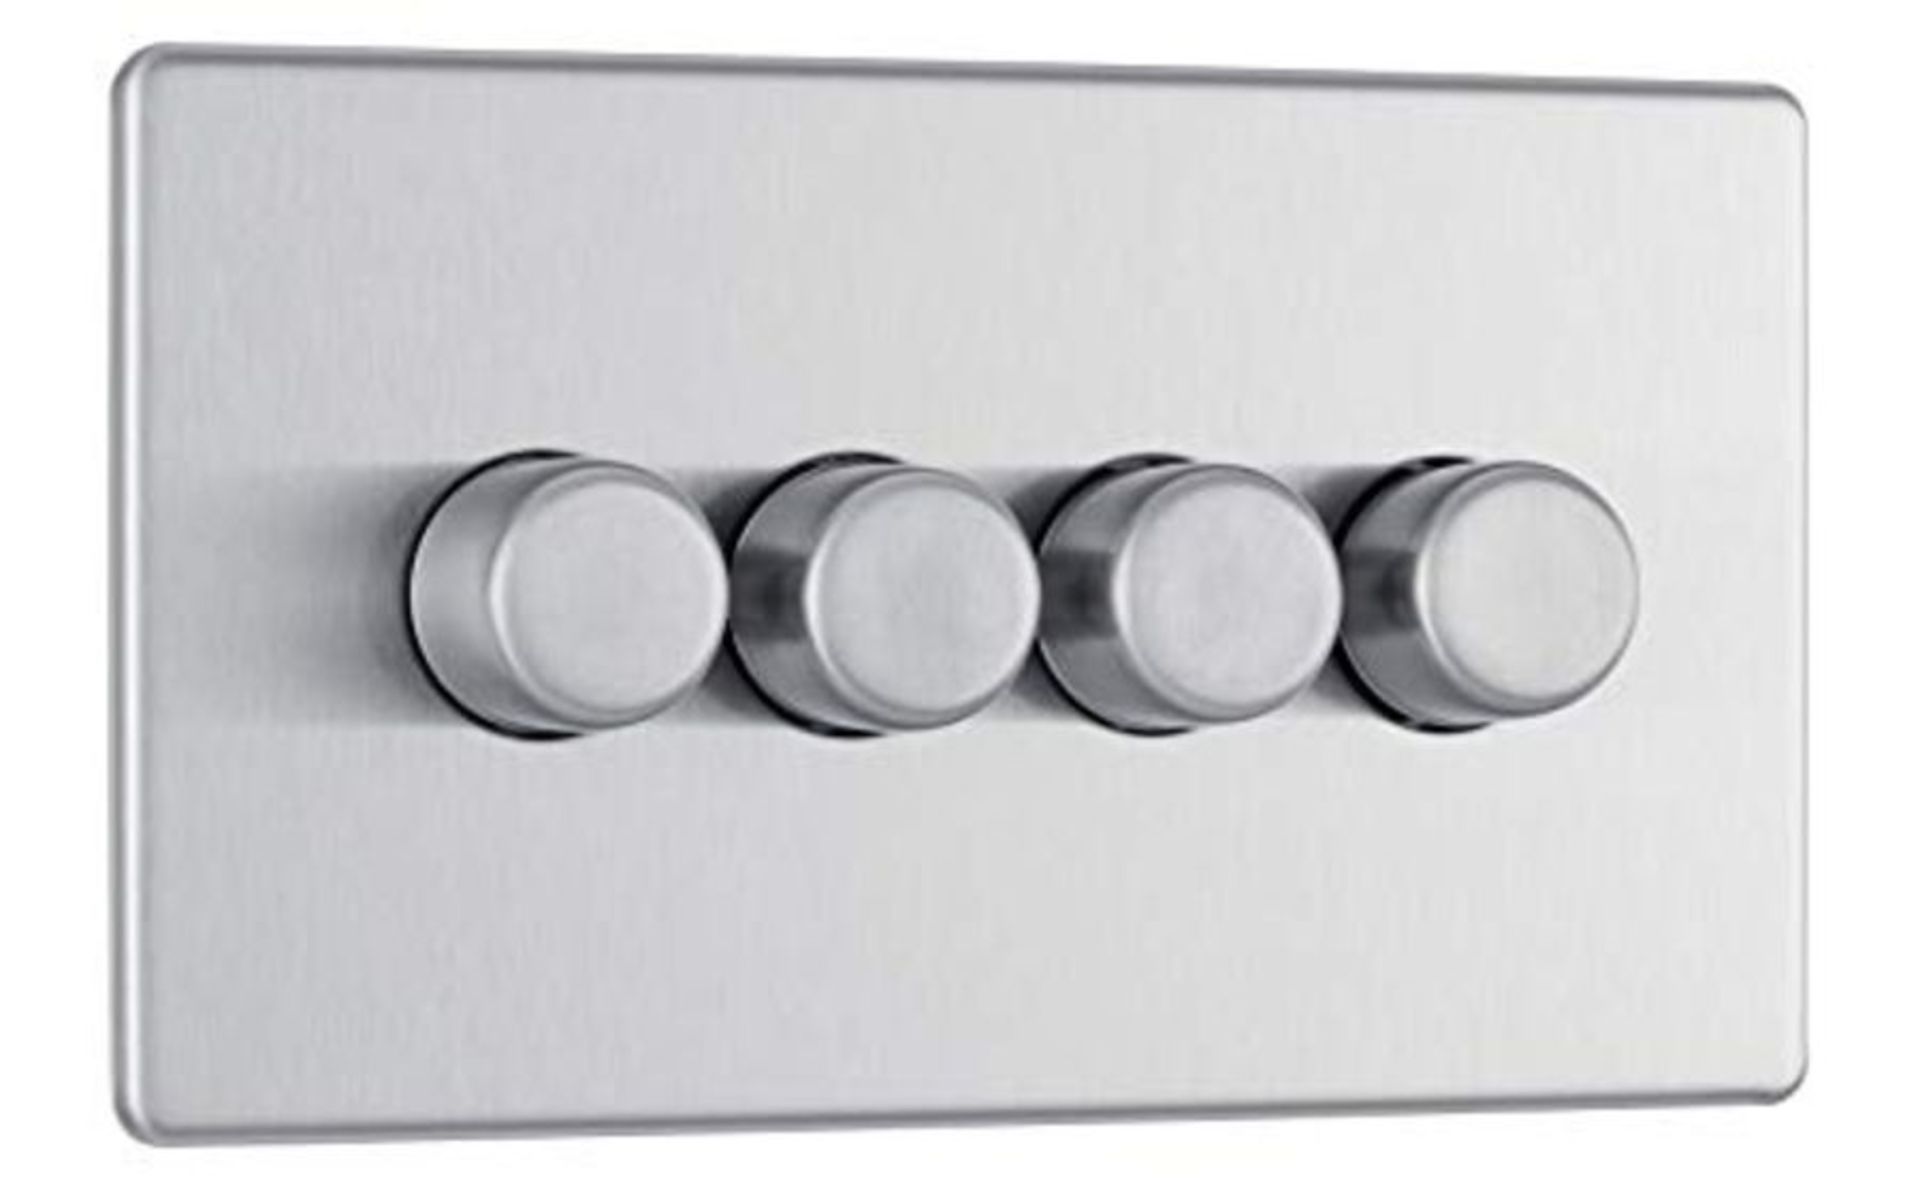 BG Electrical Four Round Push Button Intelligent Dimmer Light Switch, Brushed Steel, F